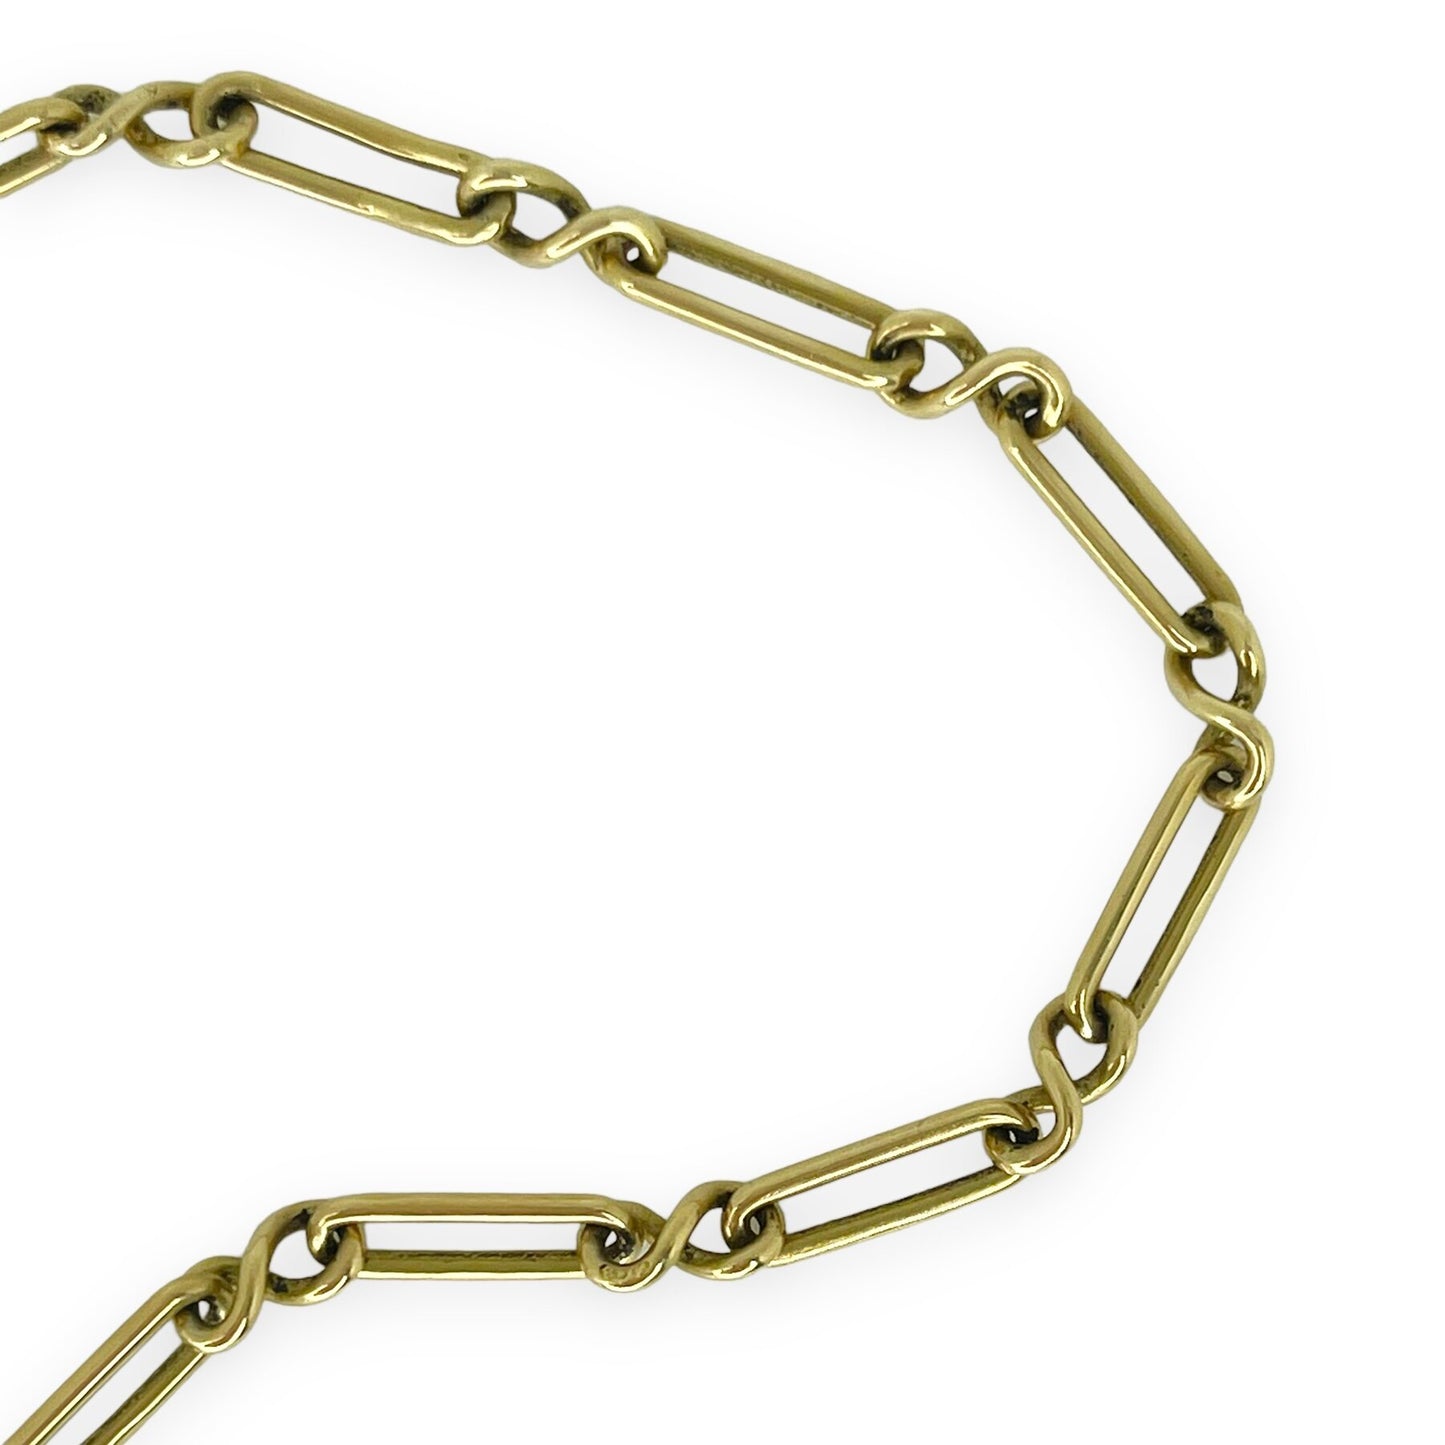 VINTAGE GOLD CHAIN w/ OPEN OVAL BAR + 'INFINITY SYMBOL' LINKS